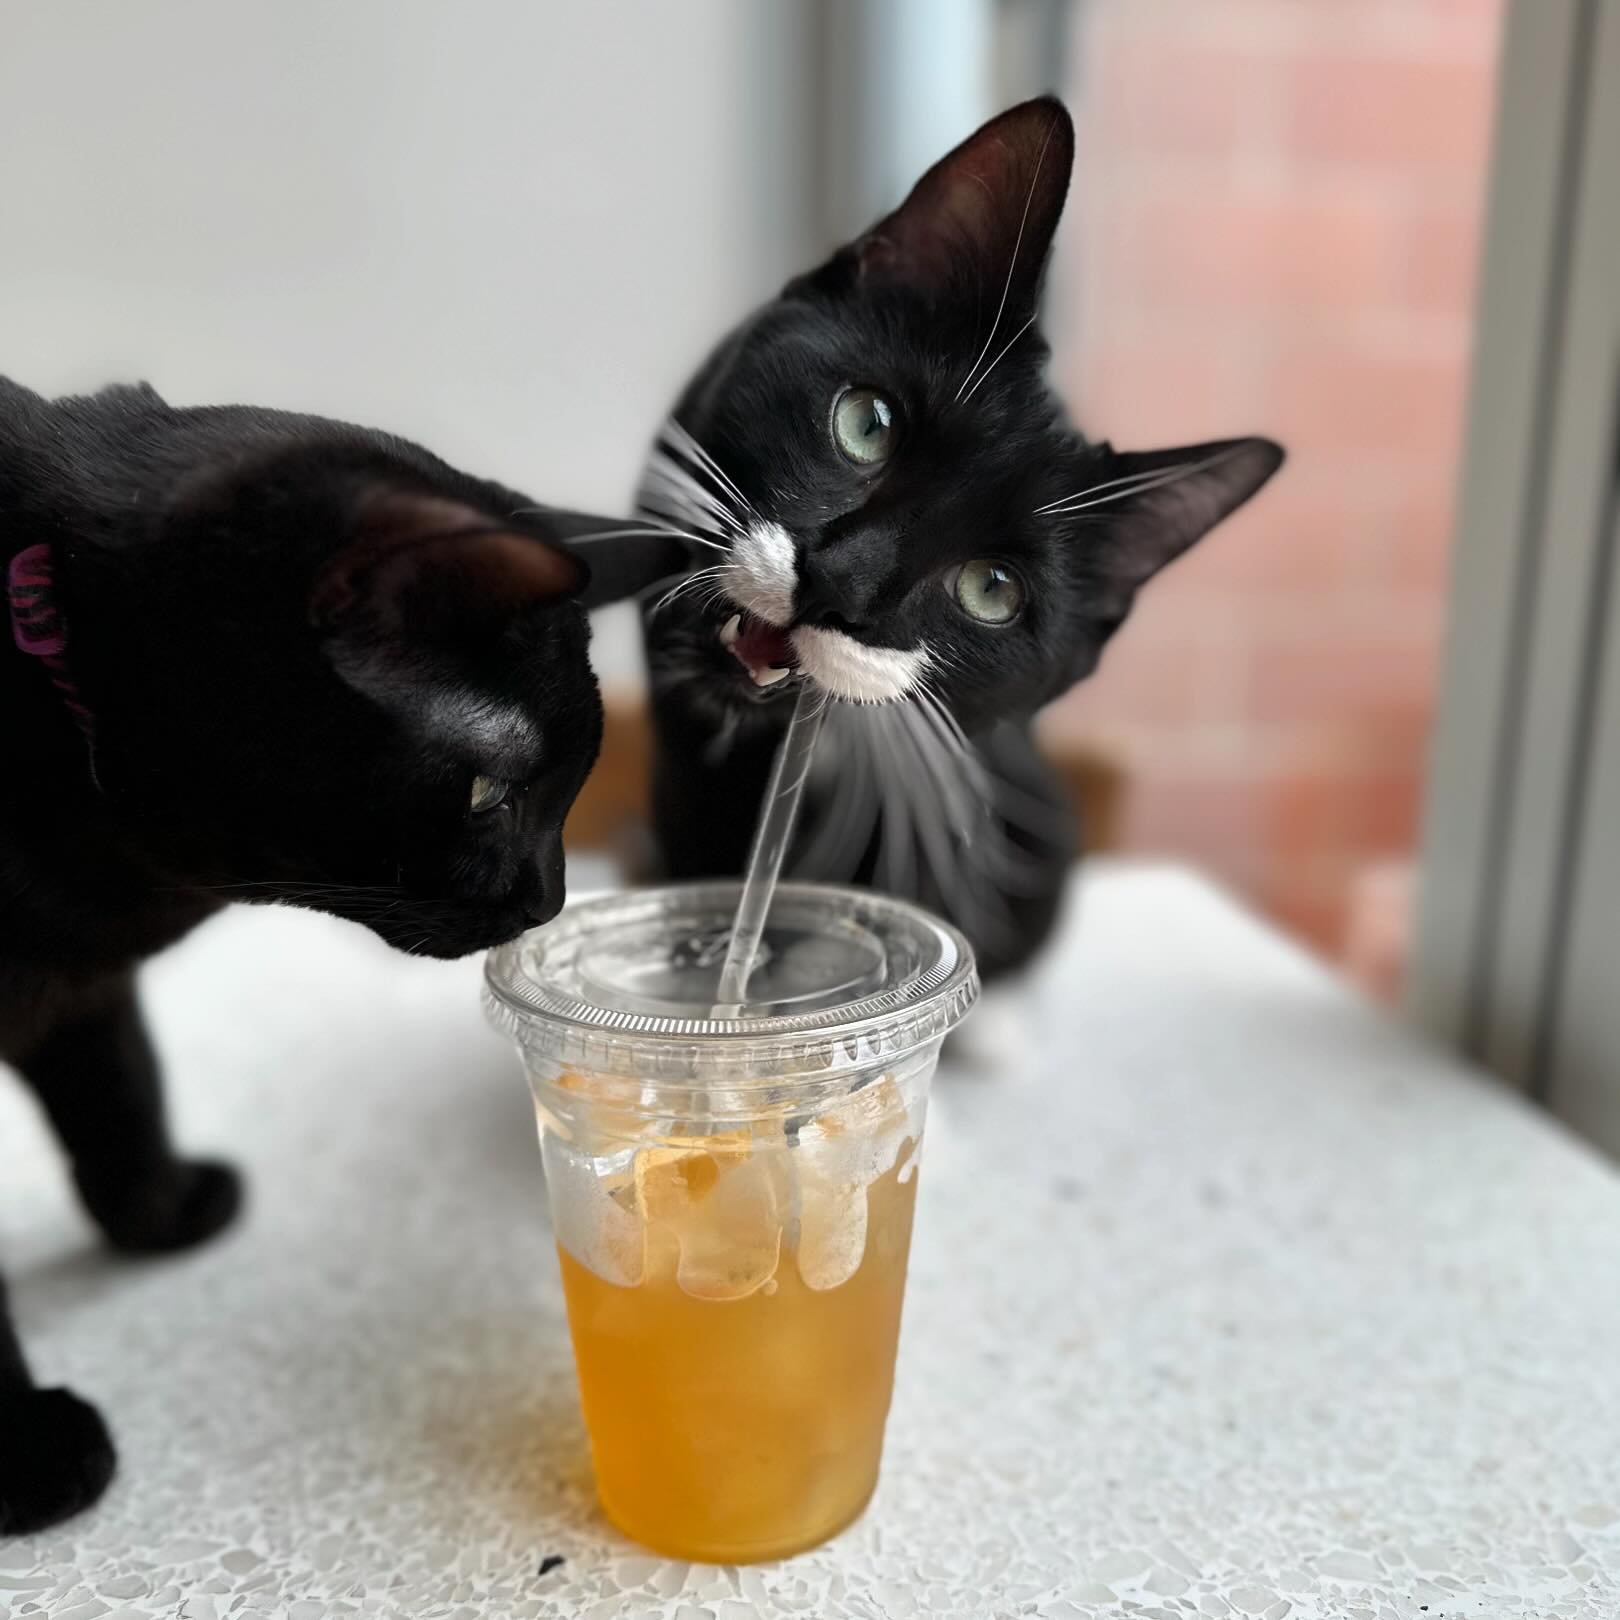 Attention‼️ If you bring your cold drink into the Cat Zone, Donny is going to chew on your straw. Unless you luck out and he&rsquo;s napping. You have now been fairly warned. 😹😹🥤🥤 #buckminsterscatcafe #adoptdontshop #foreverhomeneeded